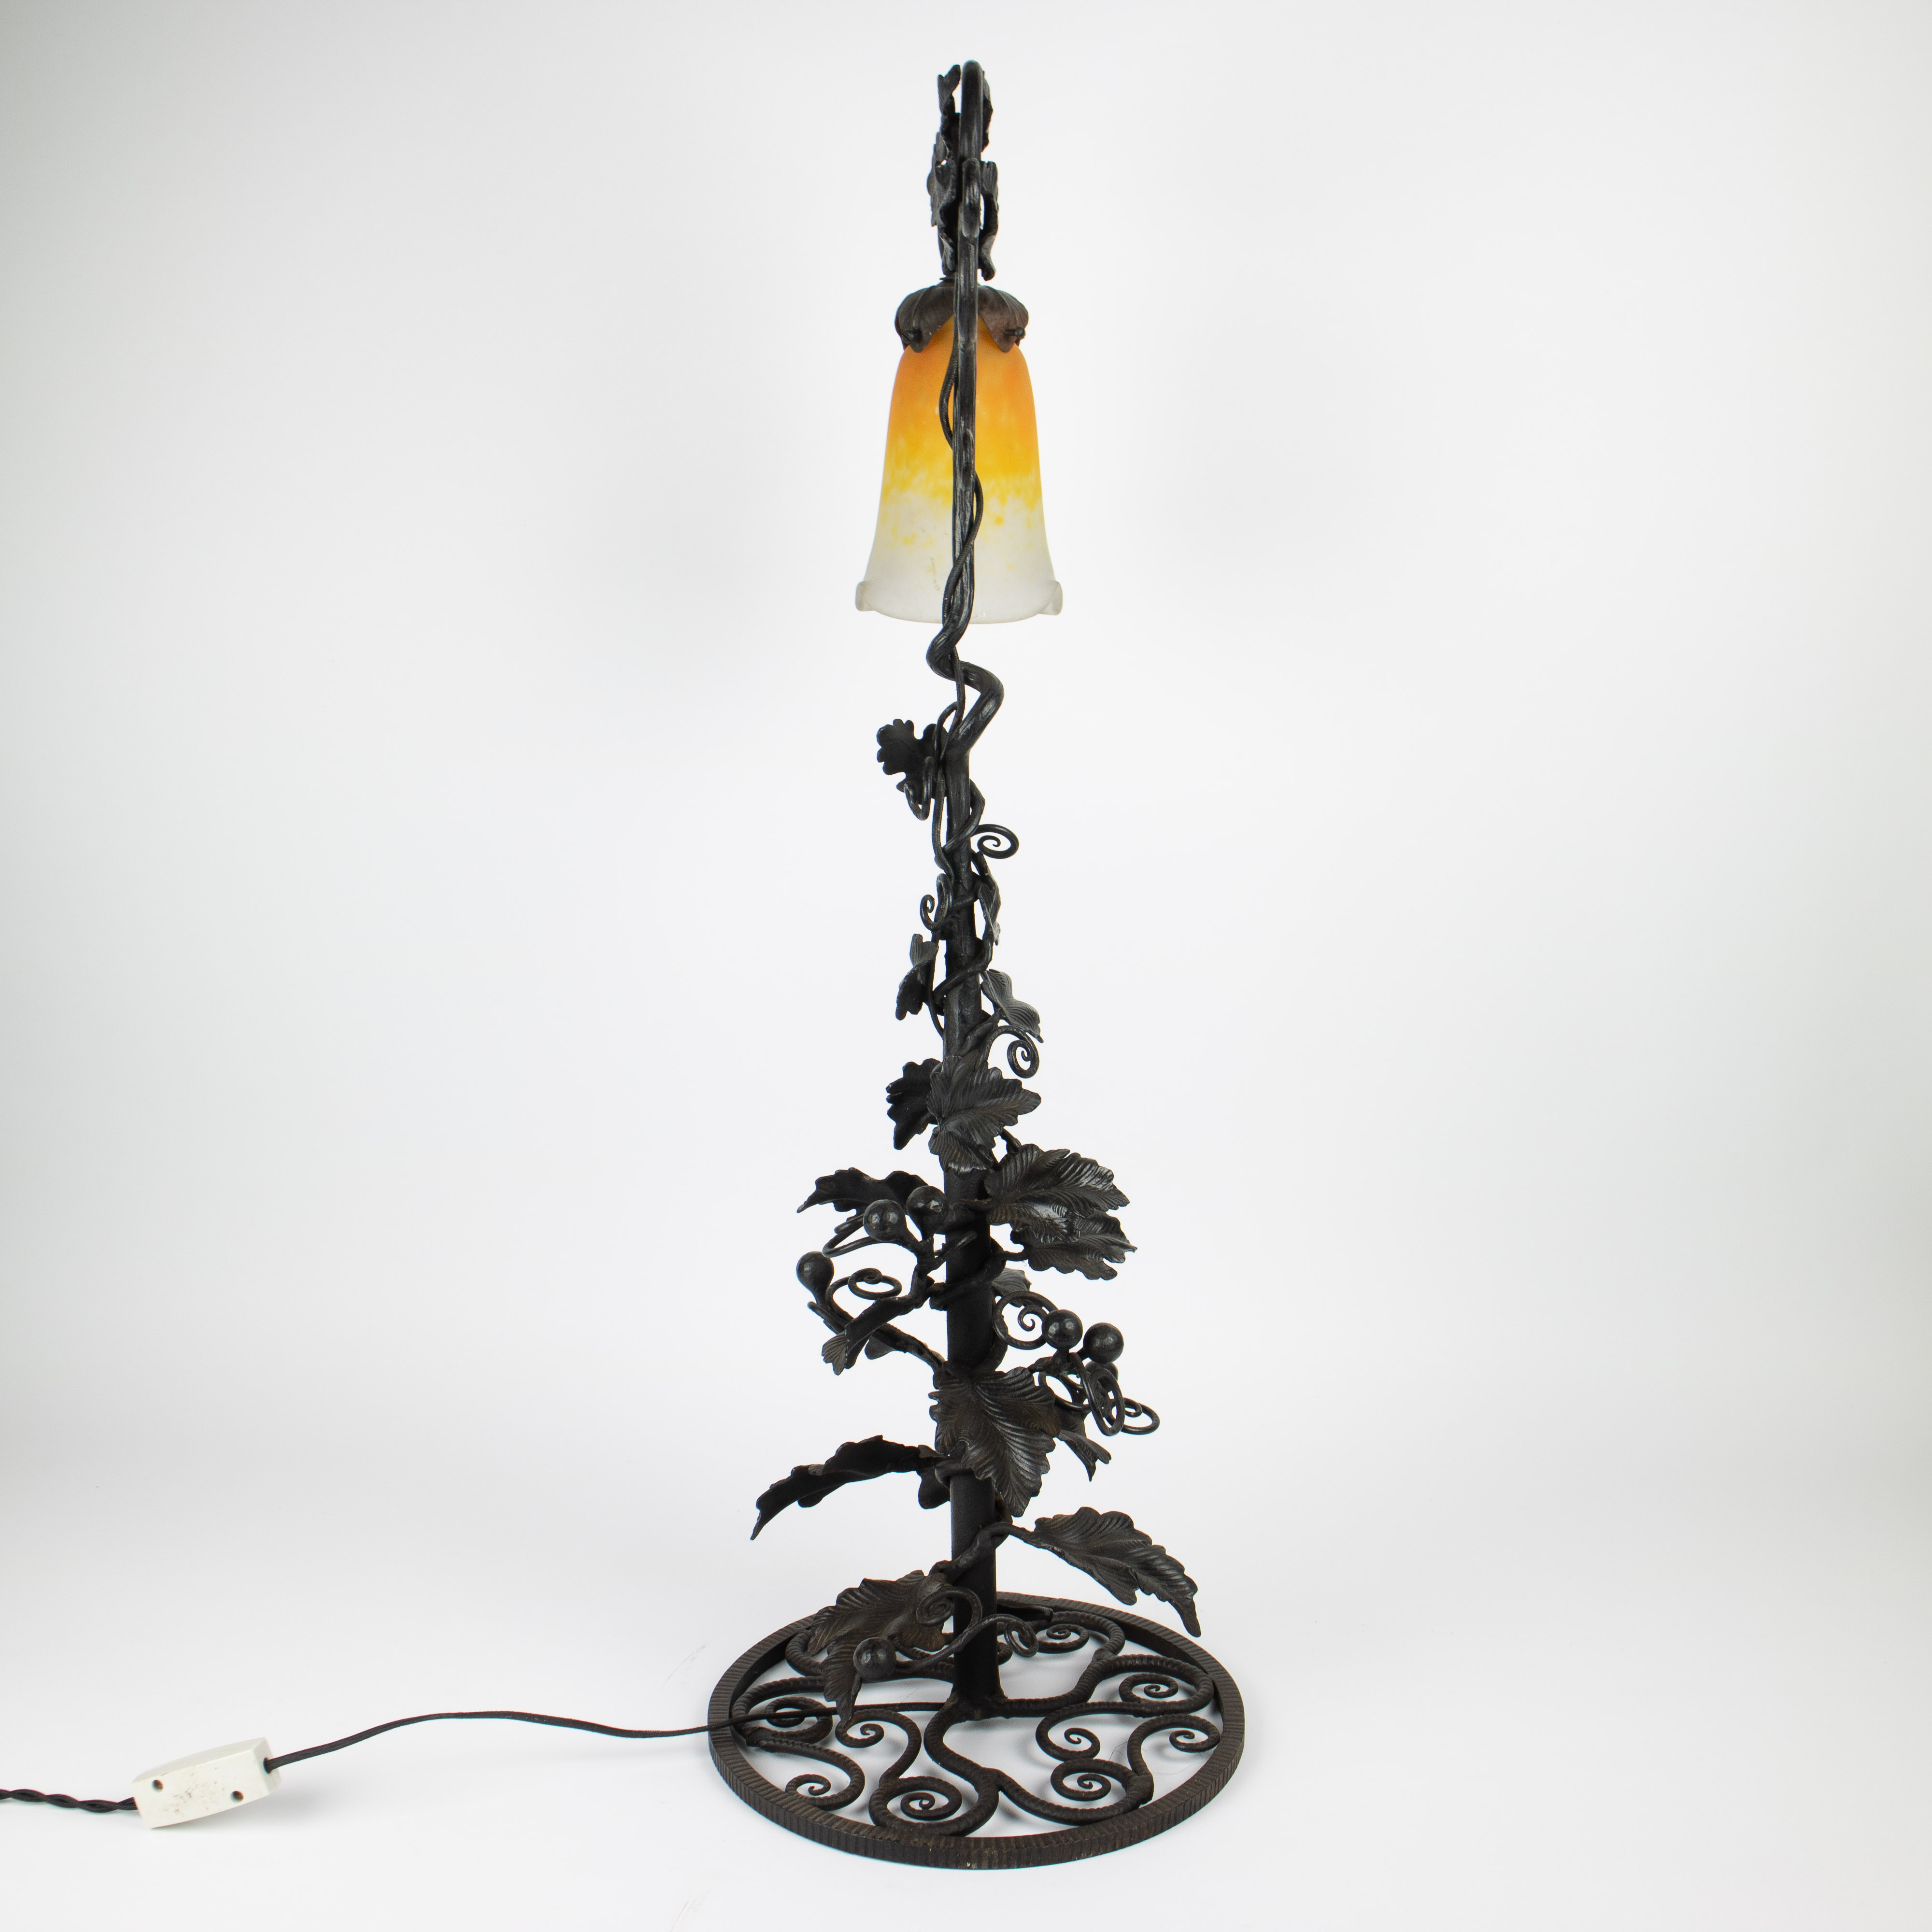 Art Deco cast iron lamp with Muller glass shade - Image 2 of 5